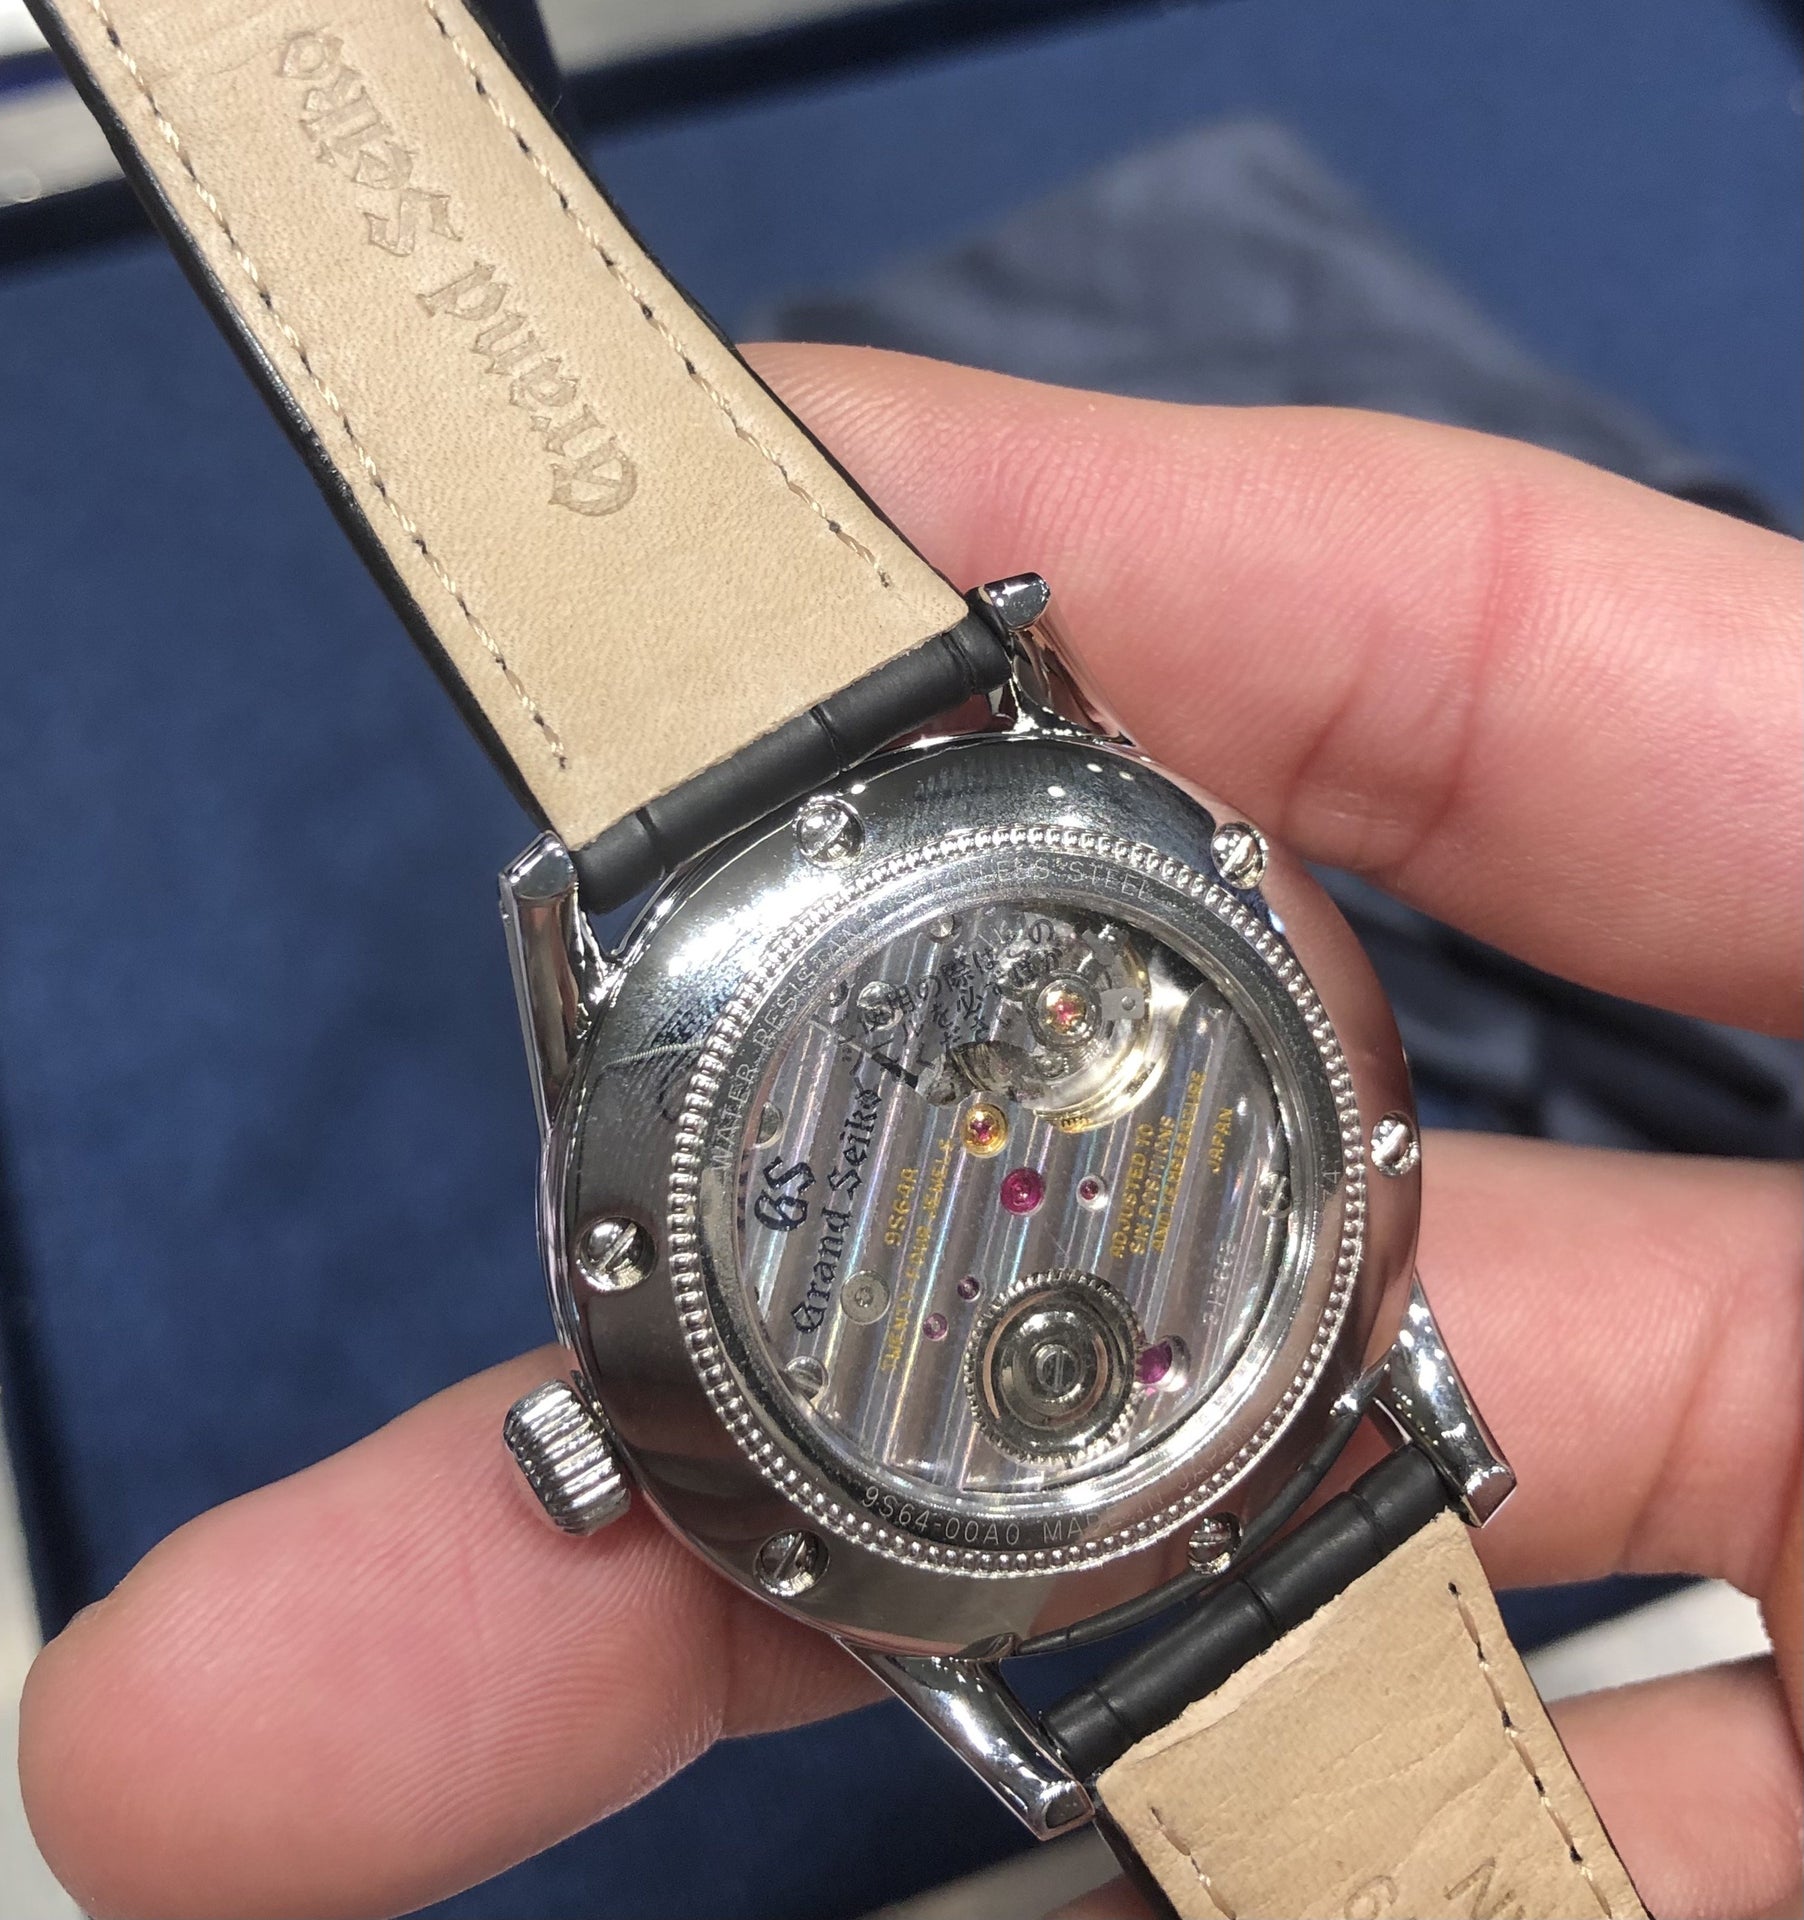 NEW and UPCOMING Seiko watches** | Page 1190 | WatchUSeek Watch Forums